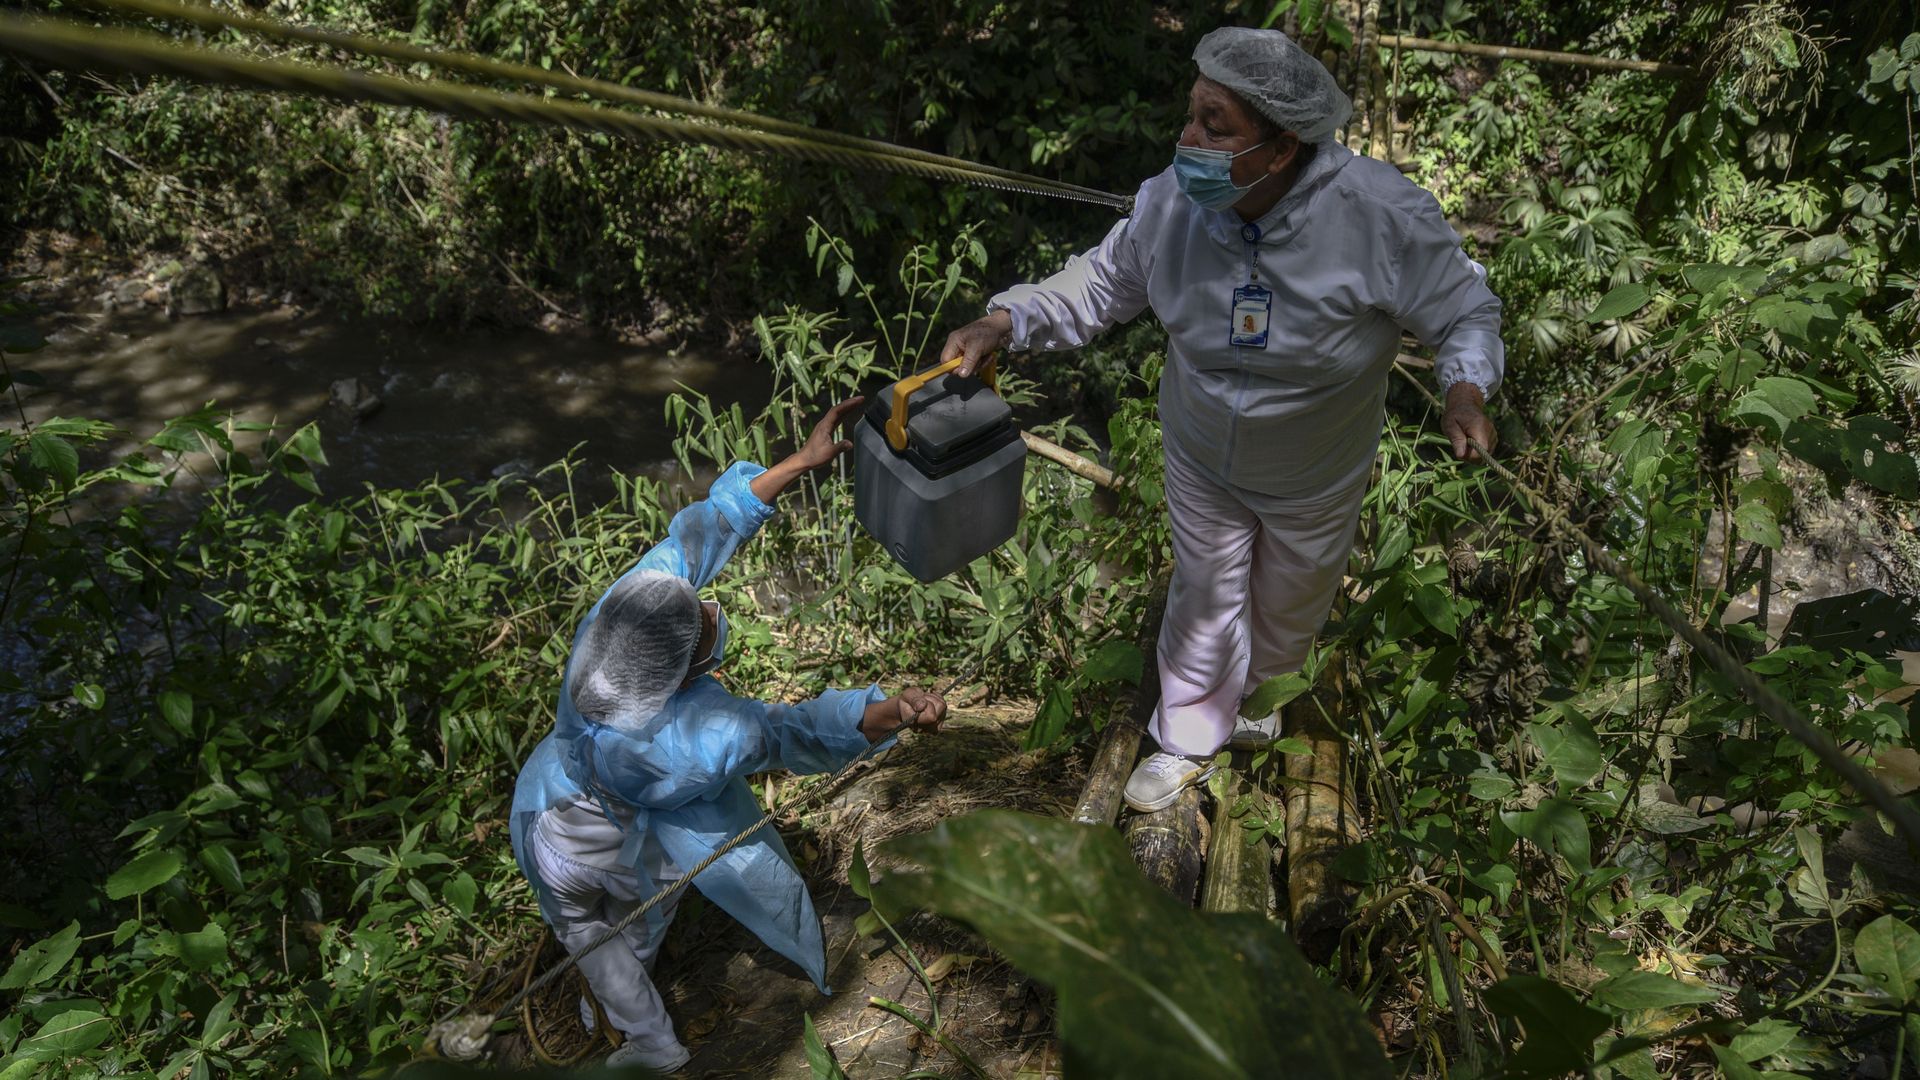 In Colombia, a vaccination brigade wades through jungle areas to reach rural inhabitants July 3. Photo: Guillermo Legaria/Getty Images